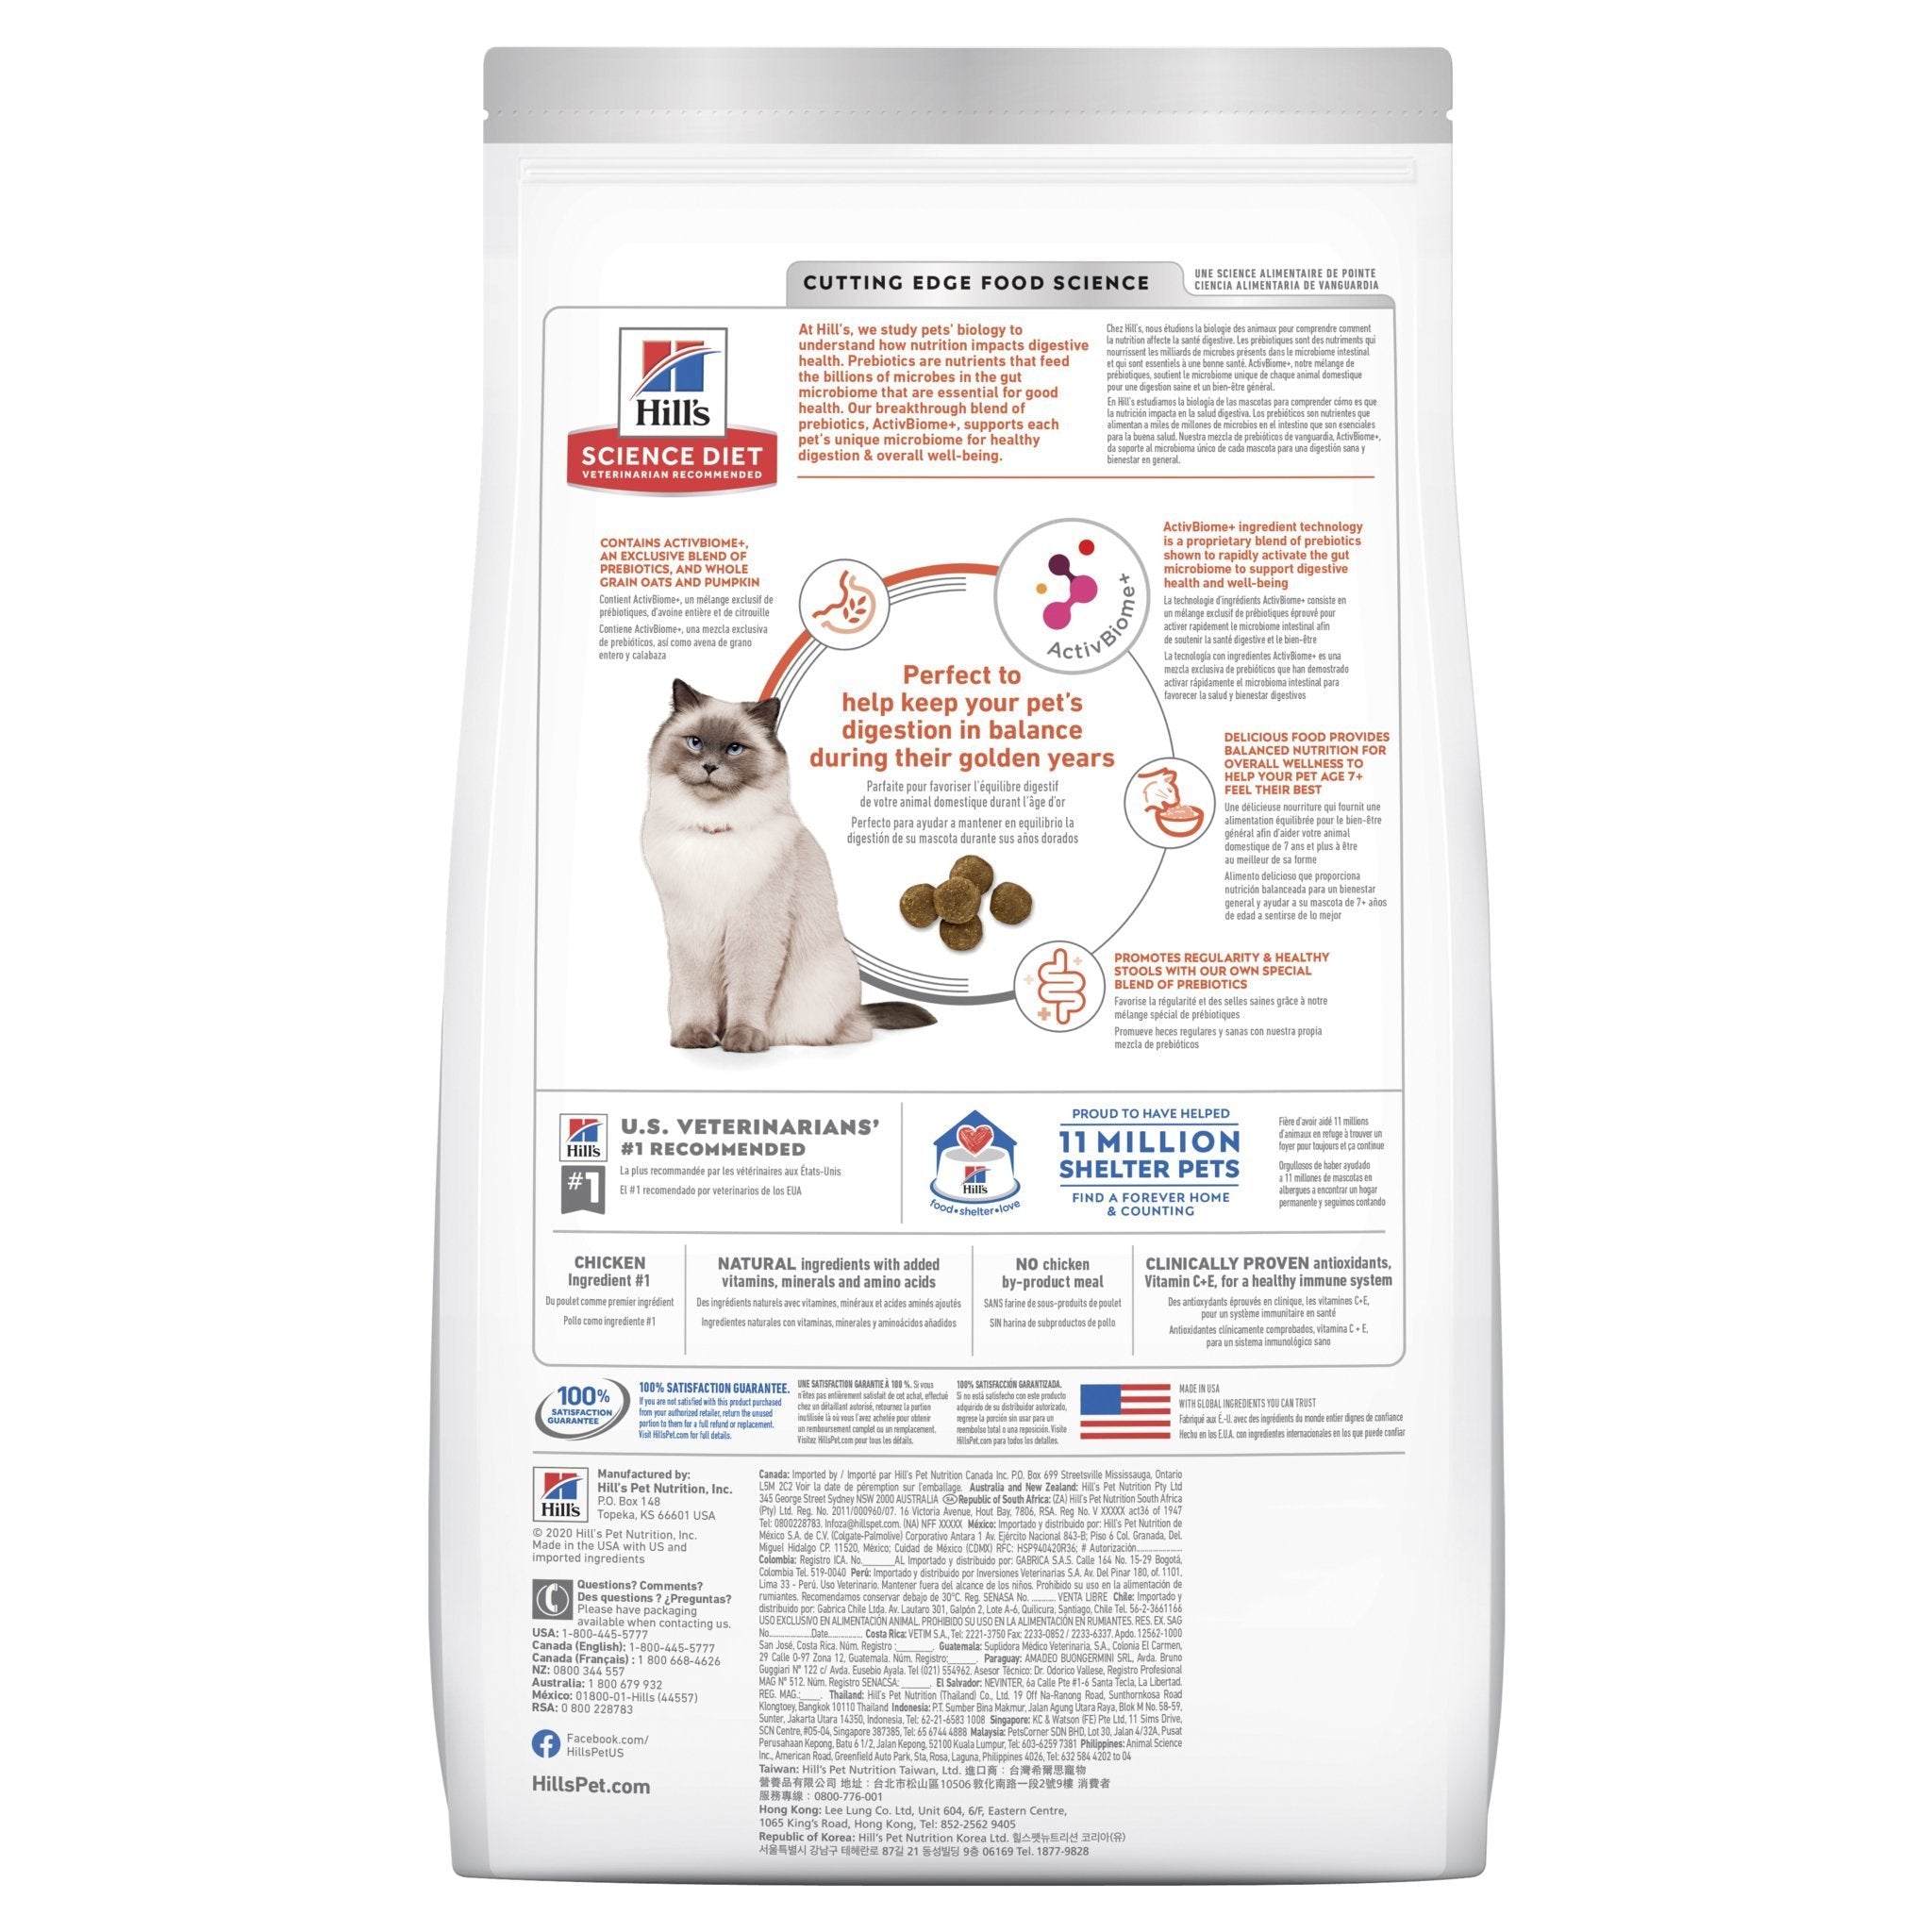 Hill's Science Diet Perfect Digestion Adult 7+ Dry Cat Food 2.72kg